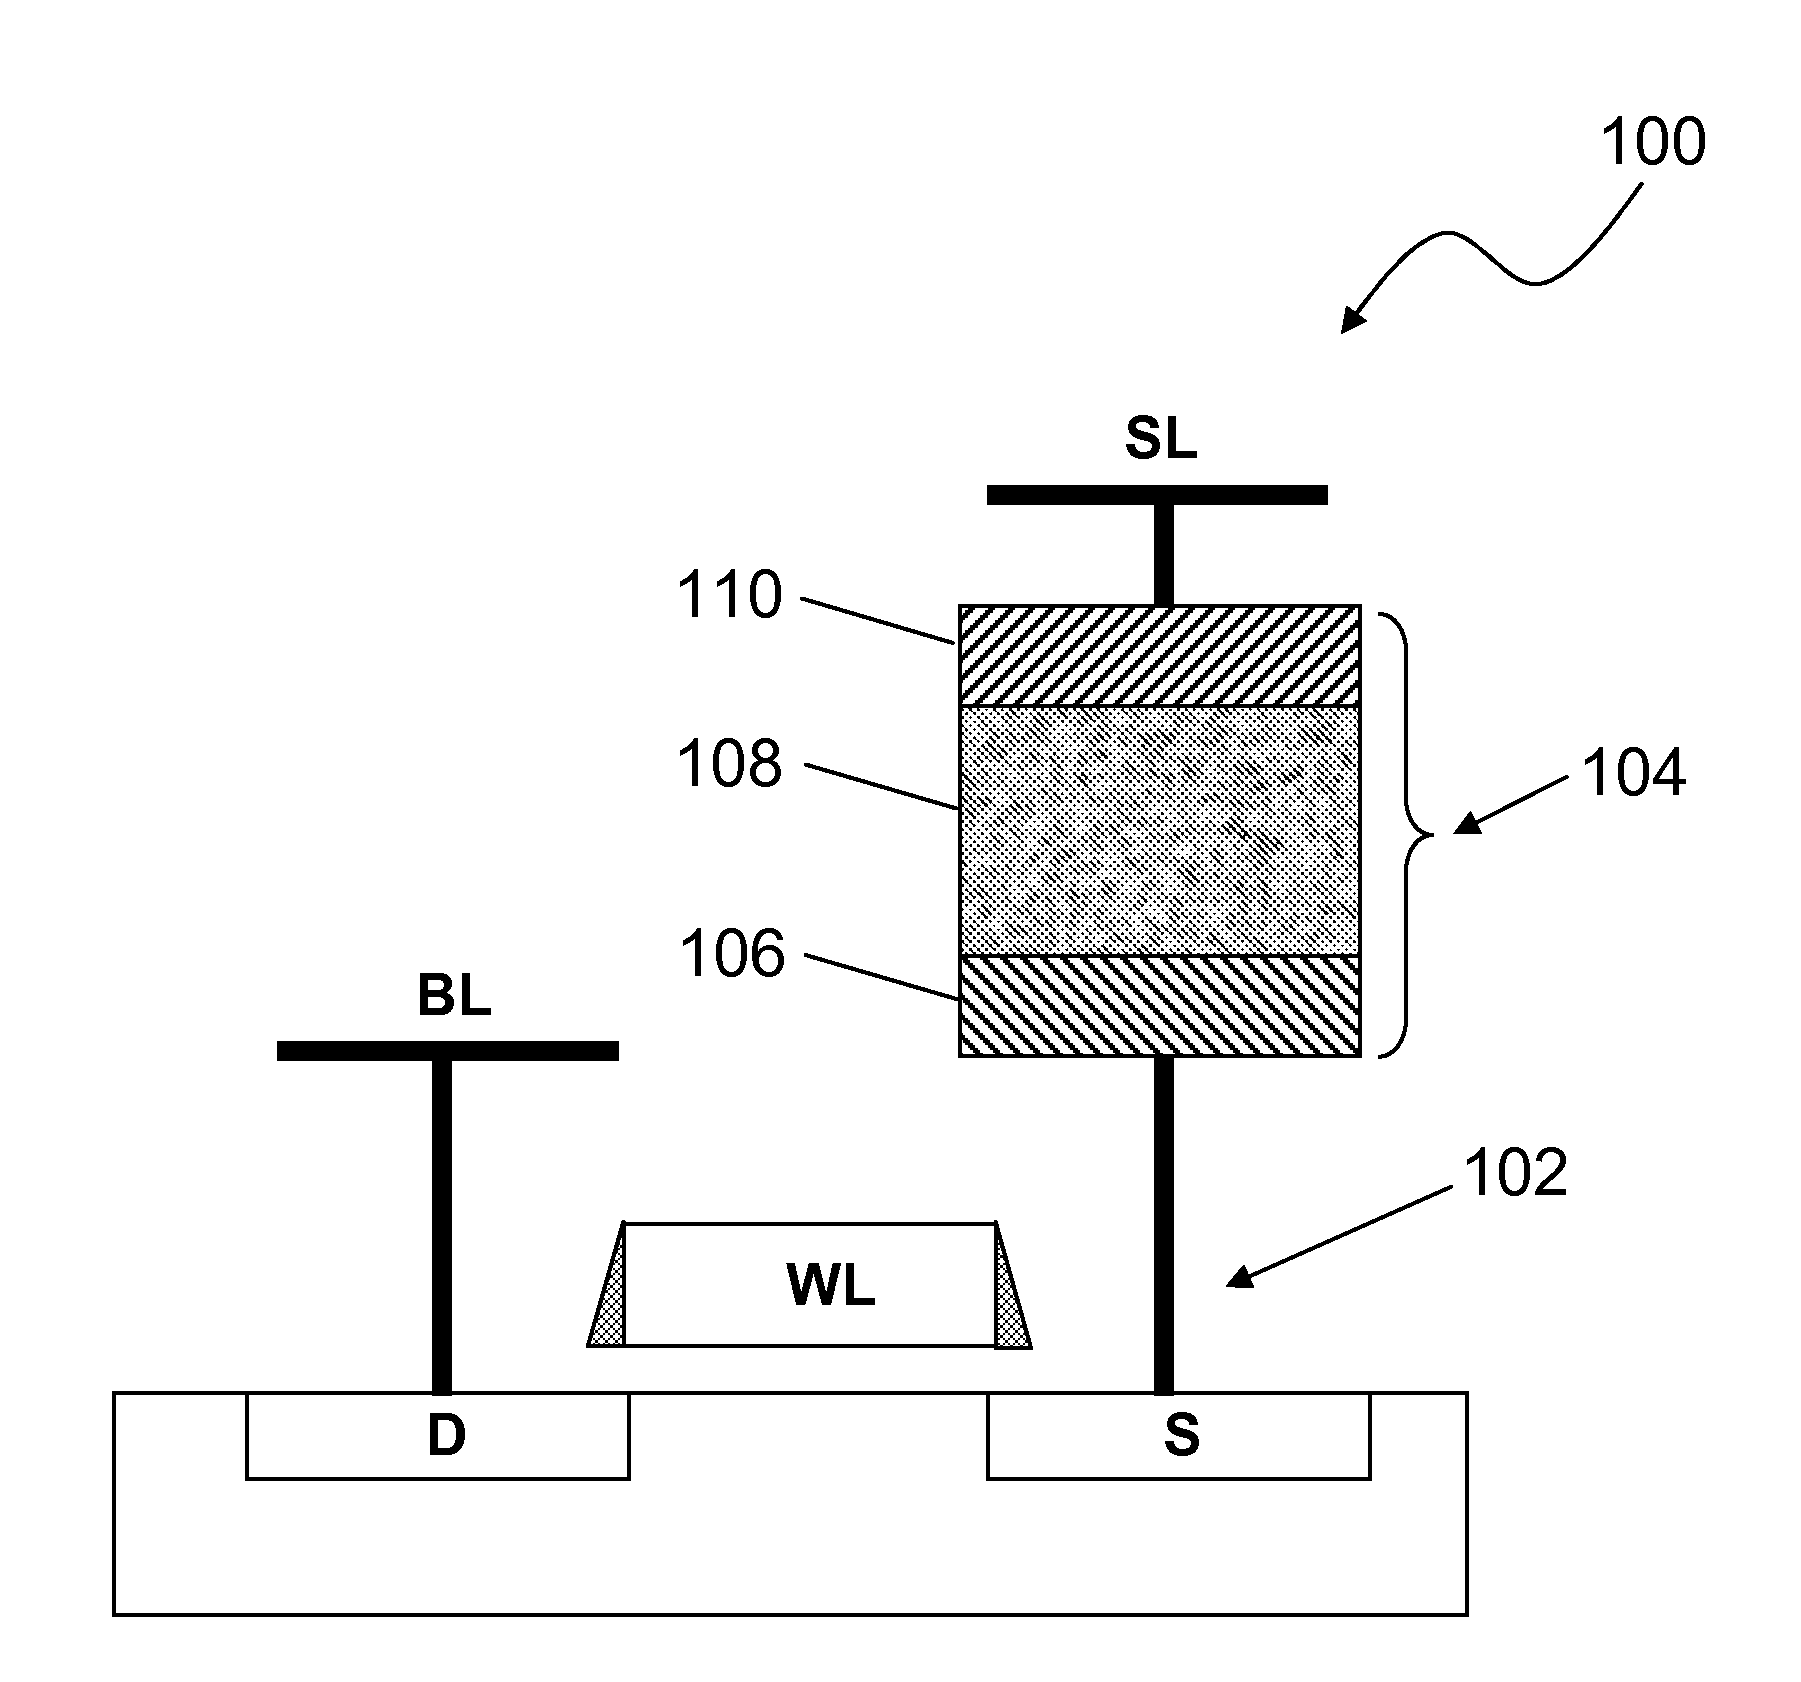 Carbon based nonvolatile cross point memory incorporating carbon based diode select devices and mosfet select devices for memory and logic applications